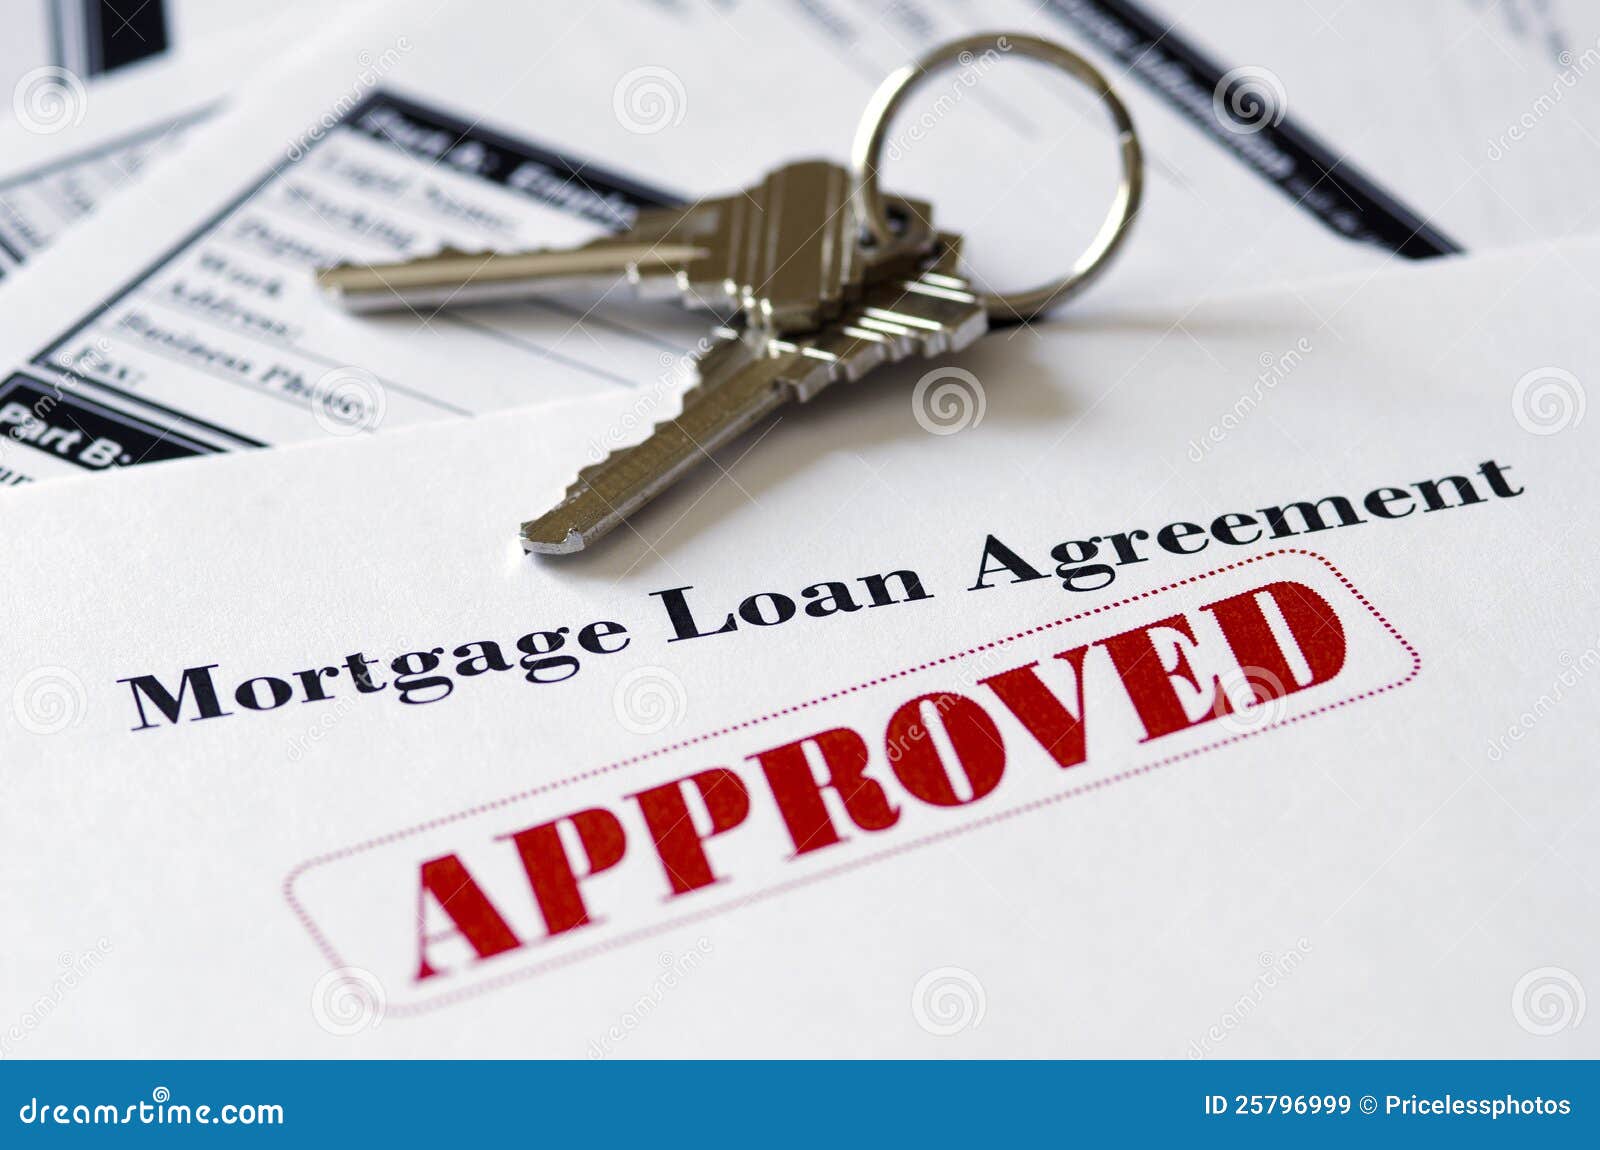 real estate mortgage approved loan document